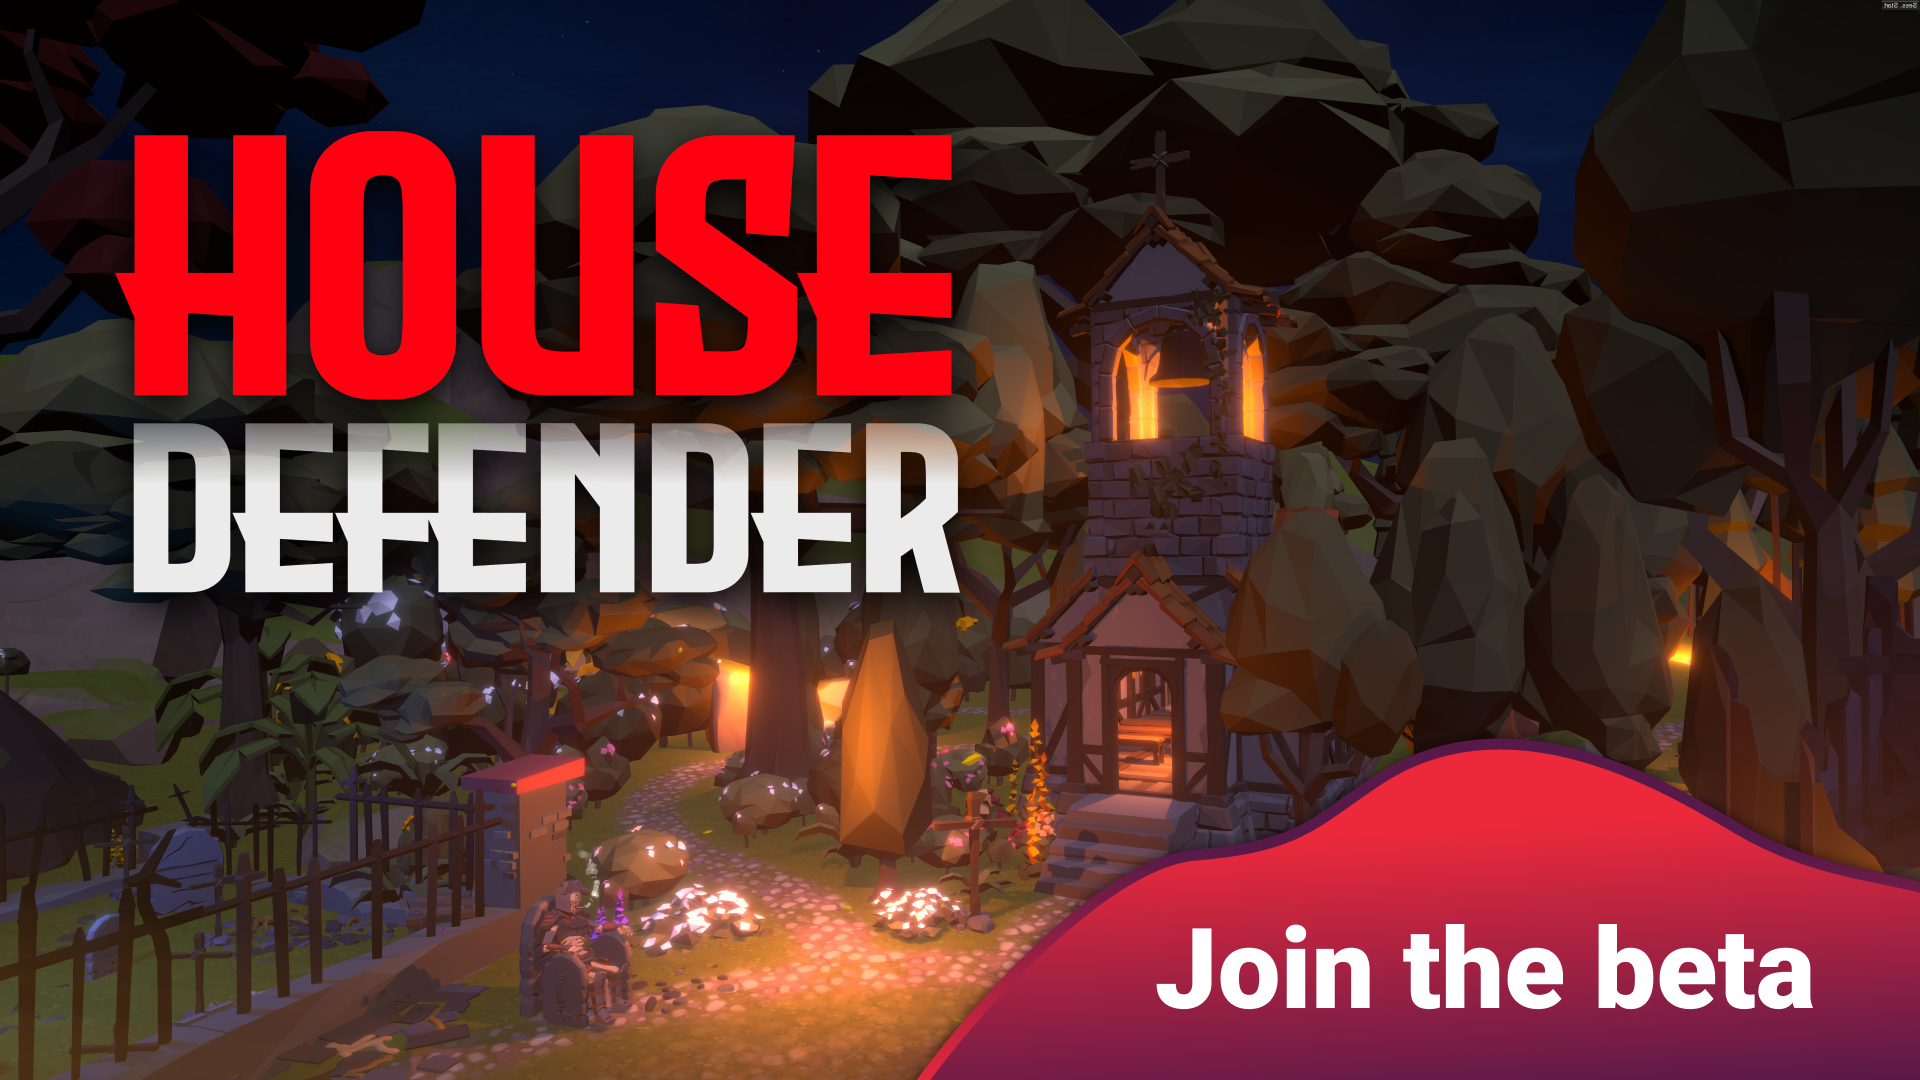 House Defender LBE - Join the Beta